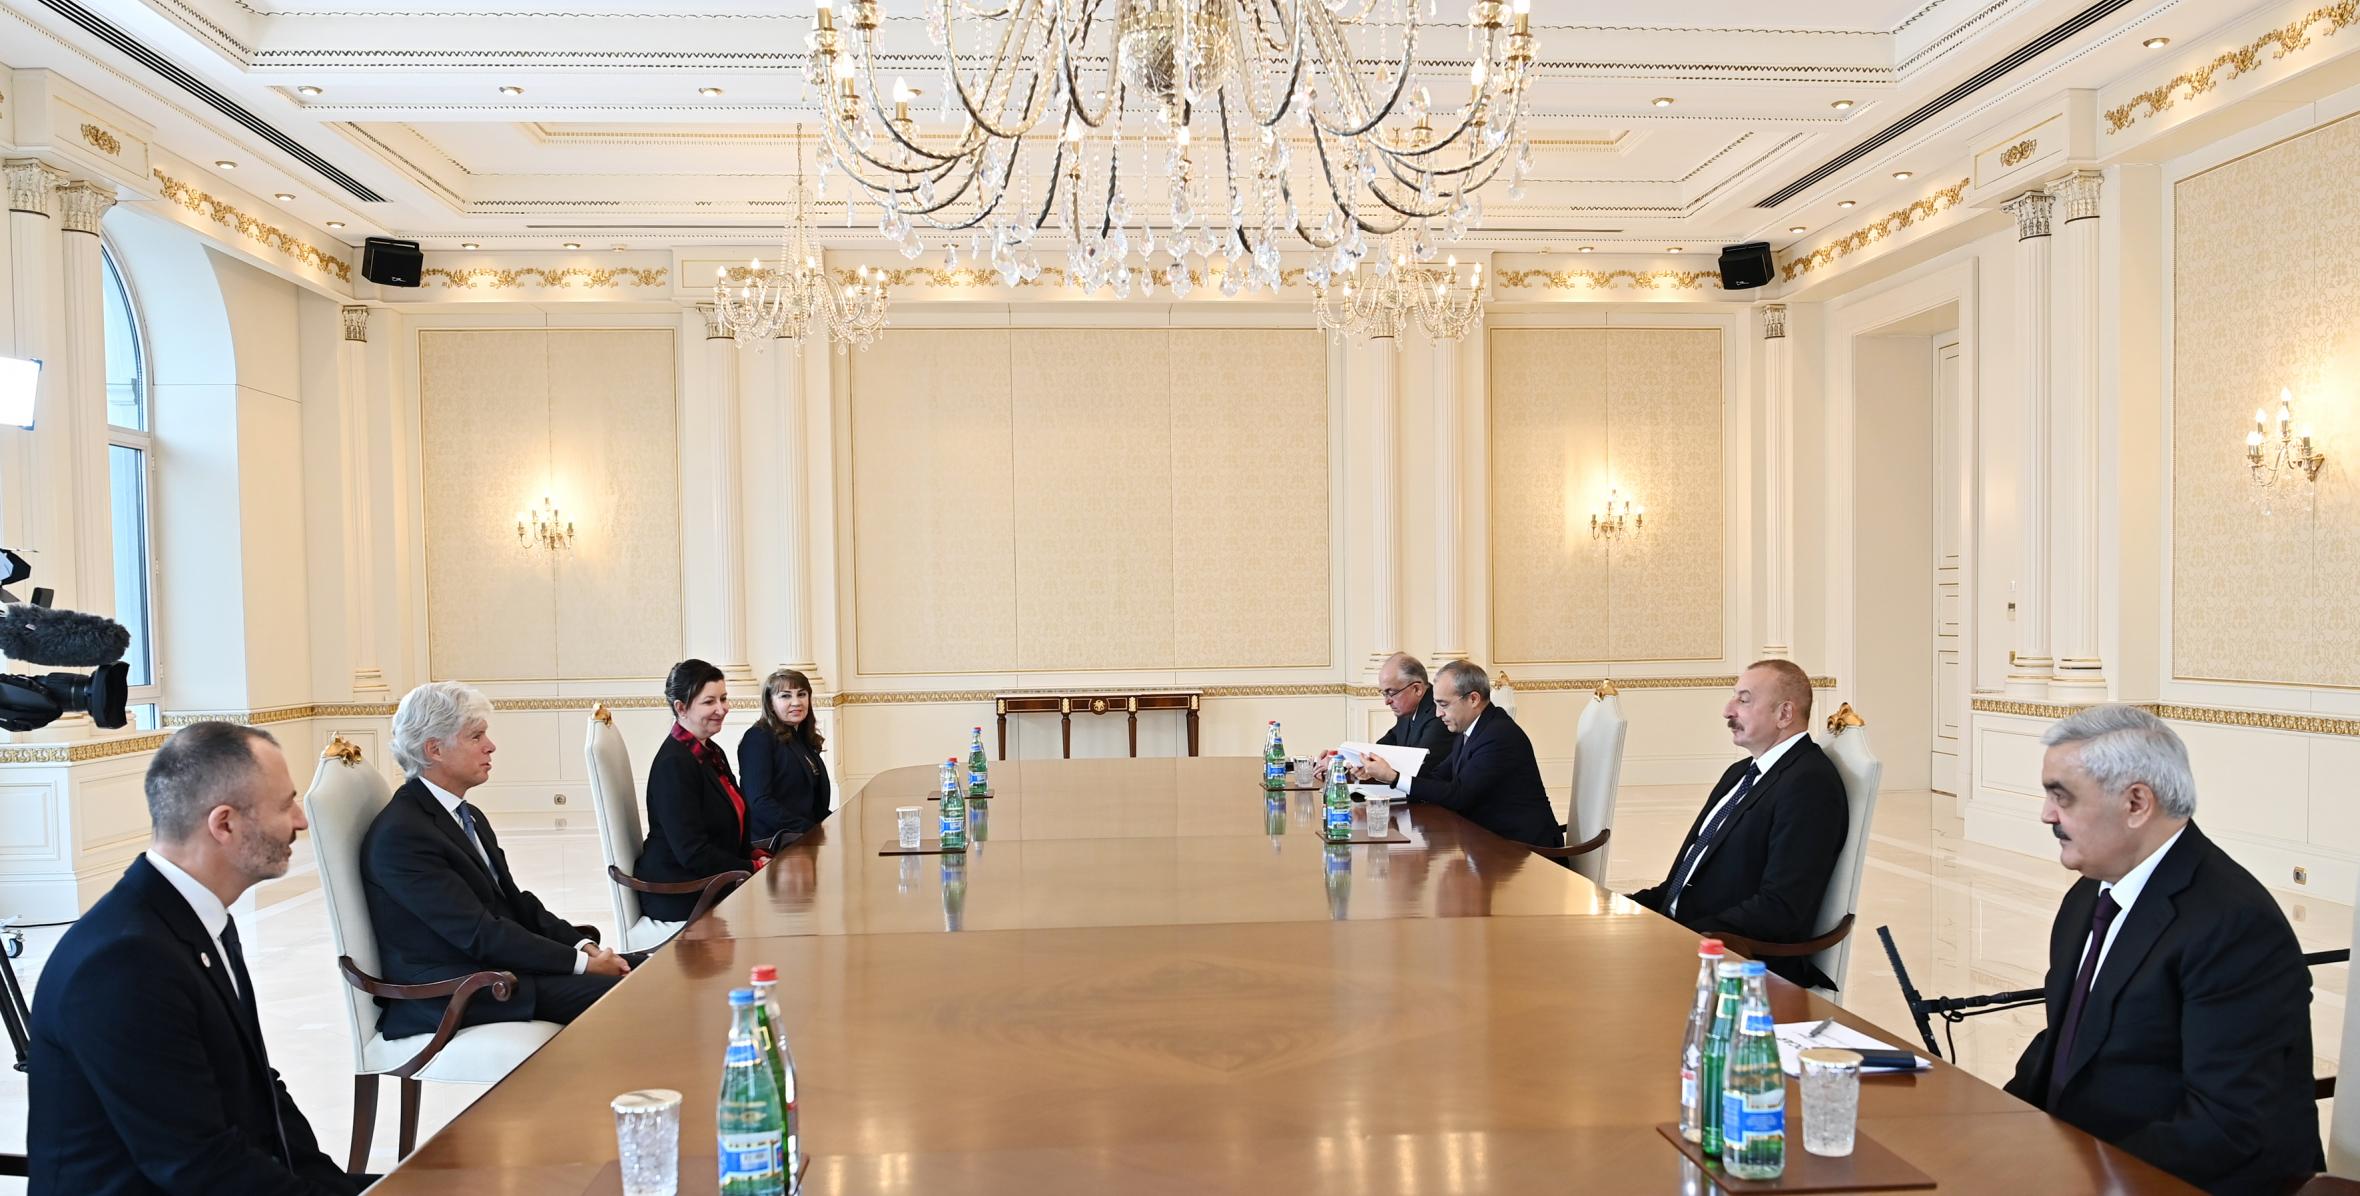 Ilham Aliyev received President for Exploration and Production at TotalEnergies